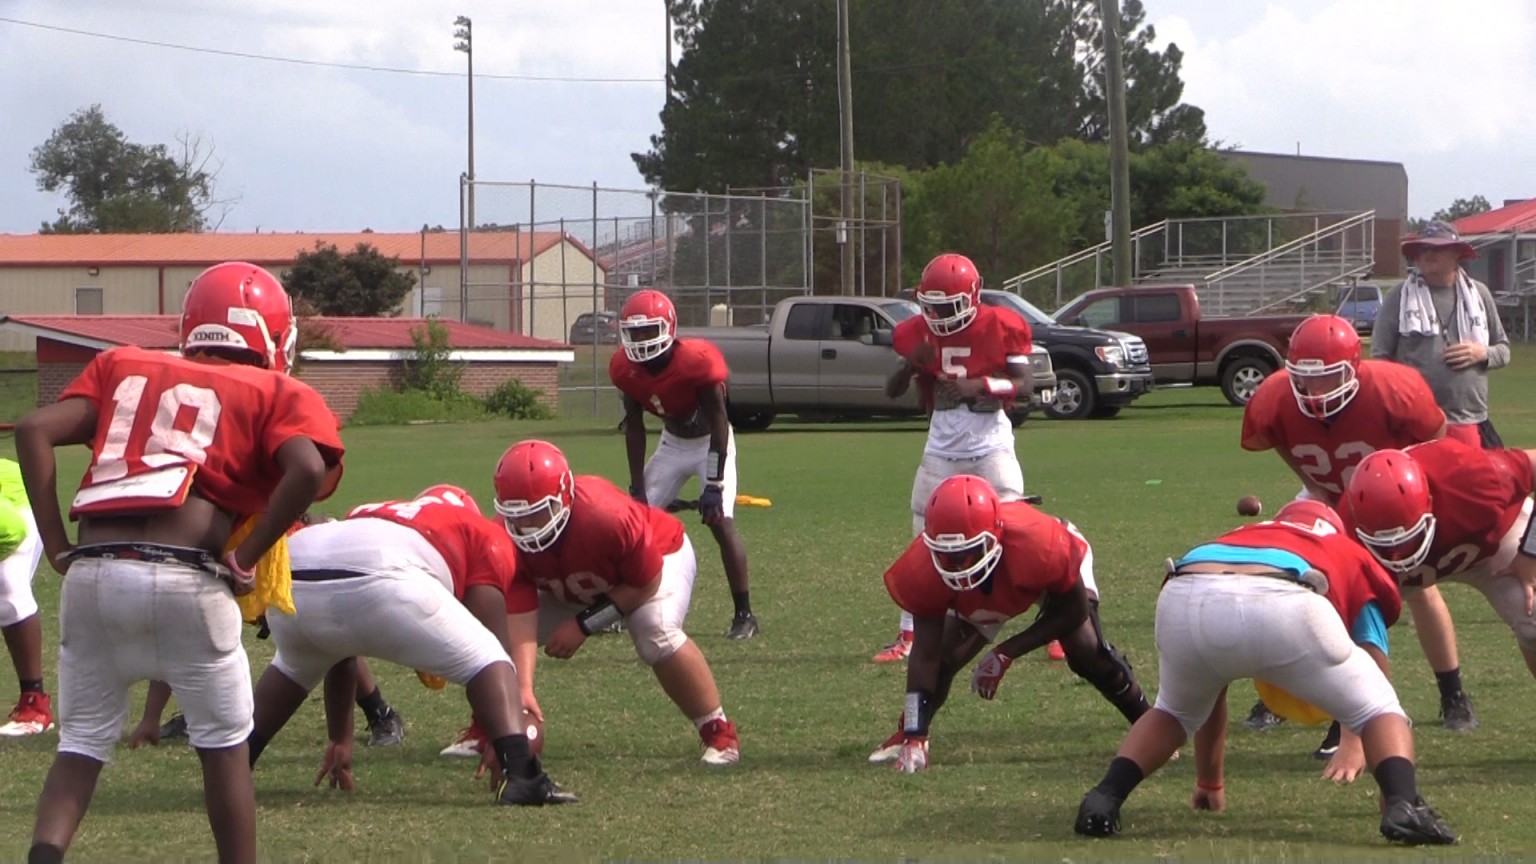 Hawkinsville, Bleckley County football set for rivalry game - 41NBC